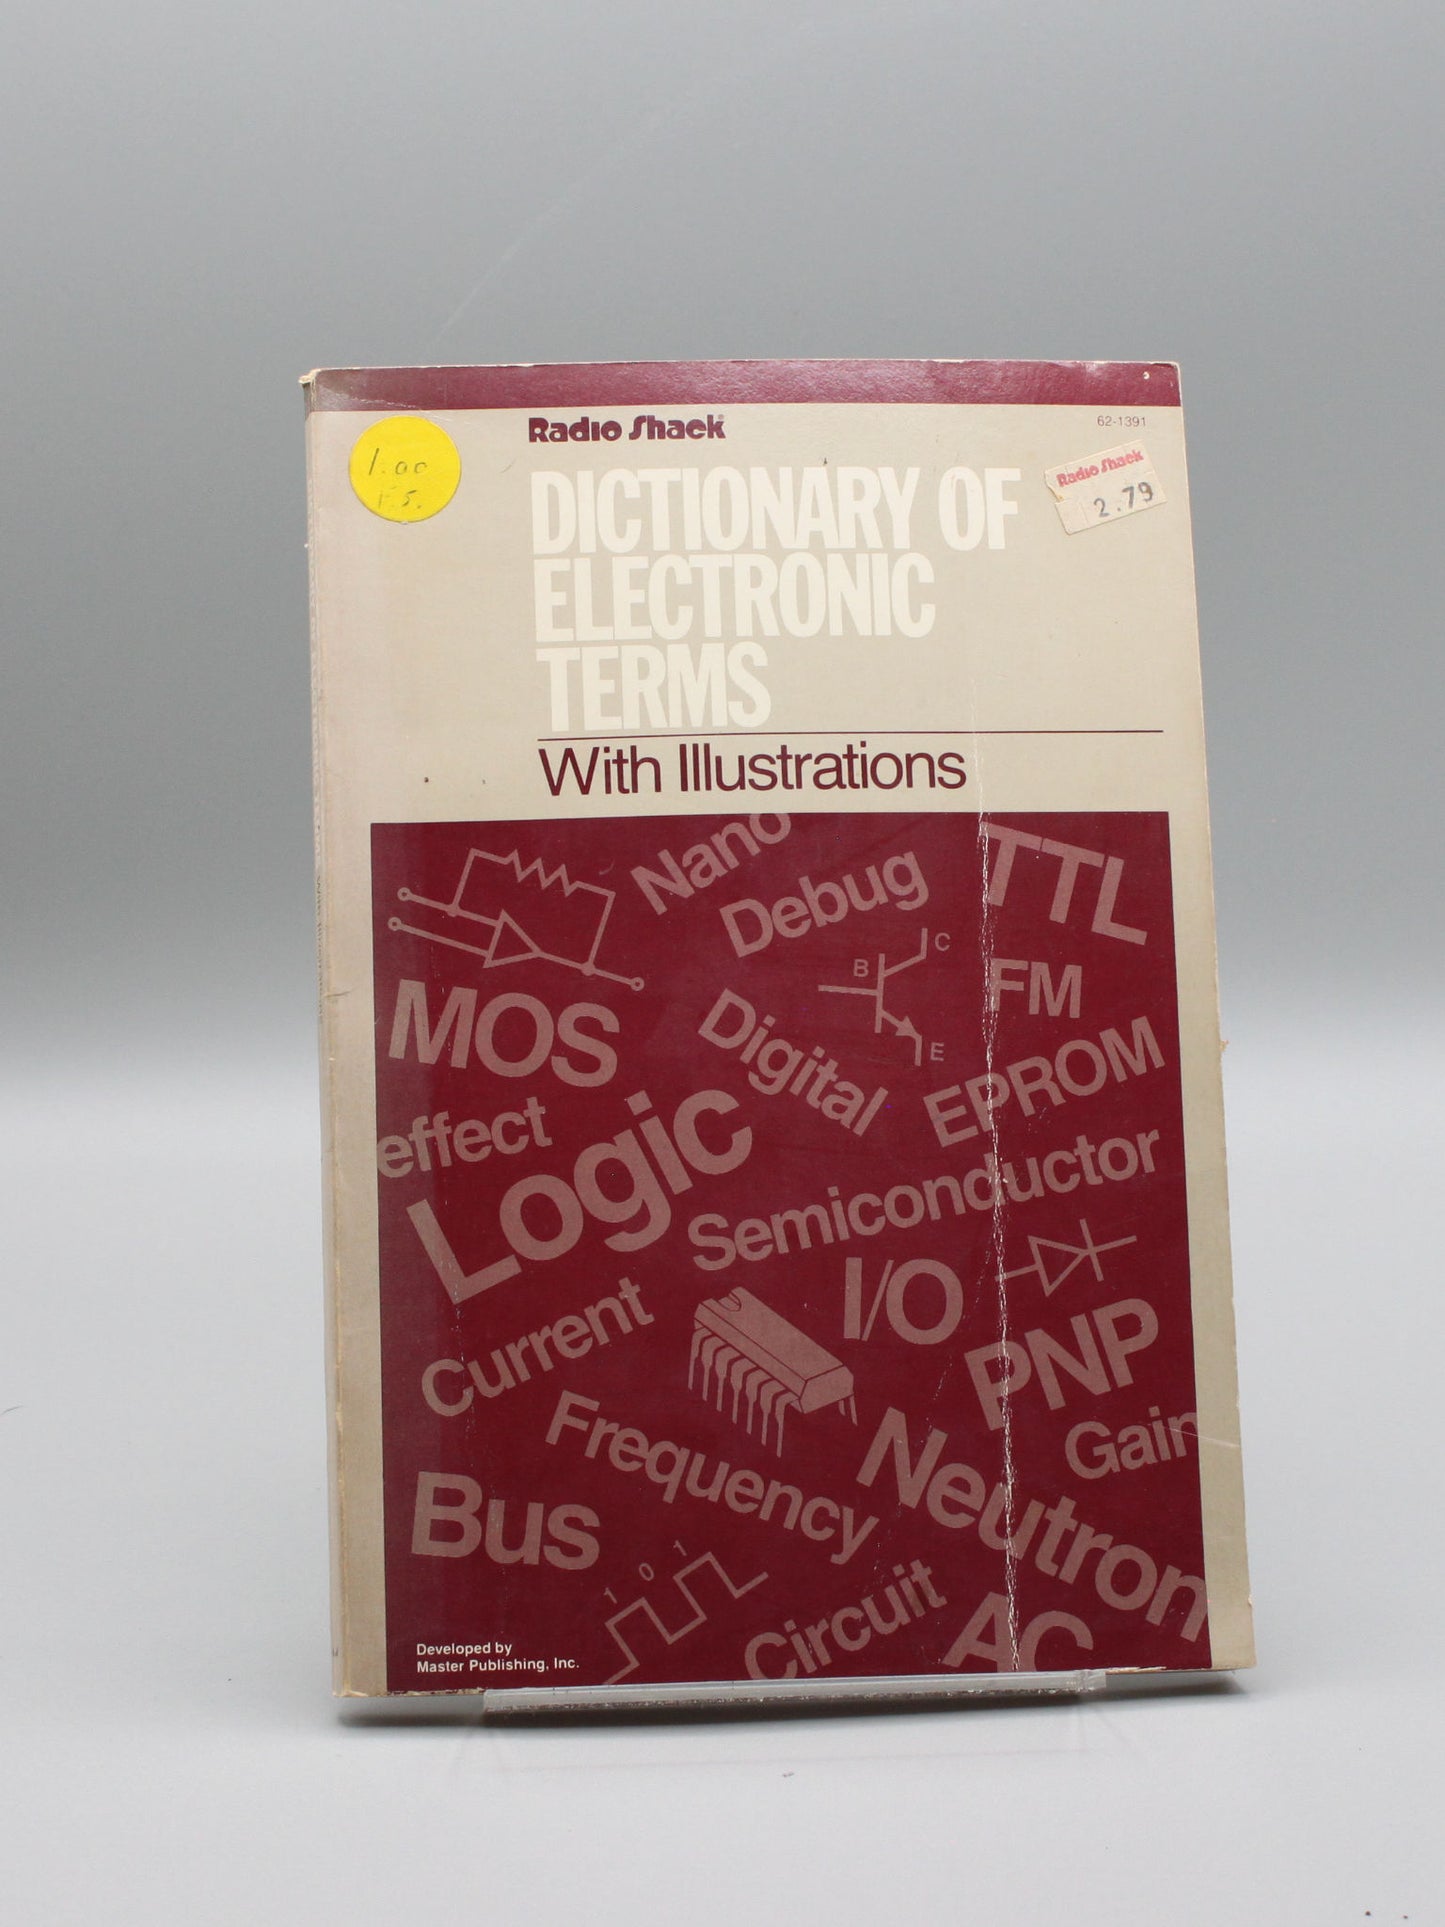 Dictionary of Electronic Terms by Radio Shack